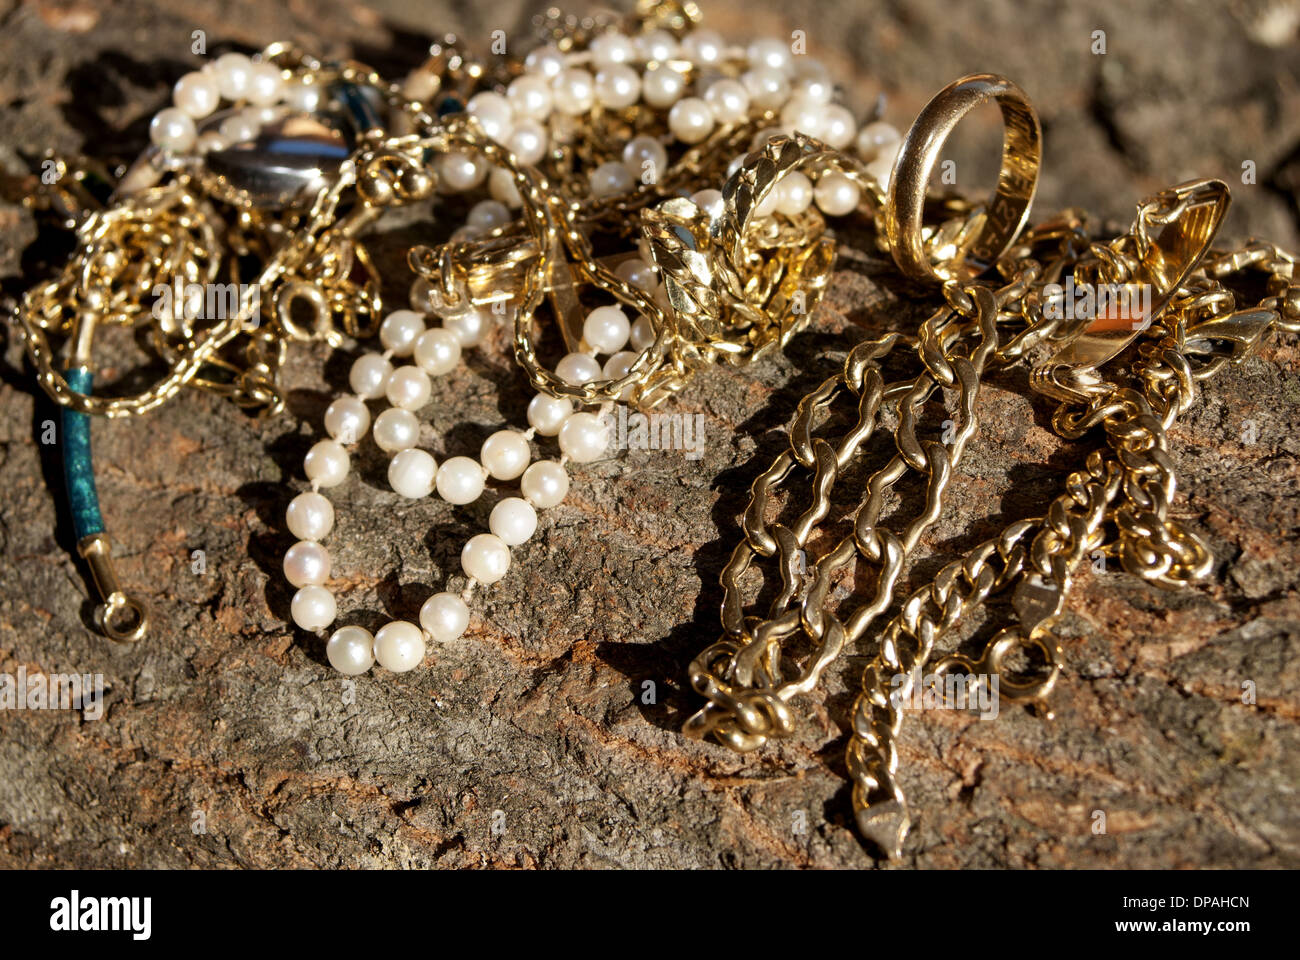 jewerly: pearl, necklace, ring, bracelet Stock Photo